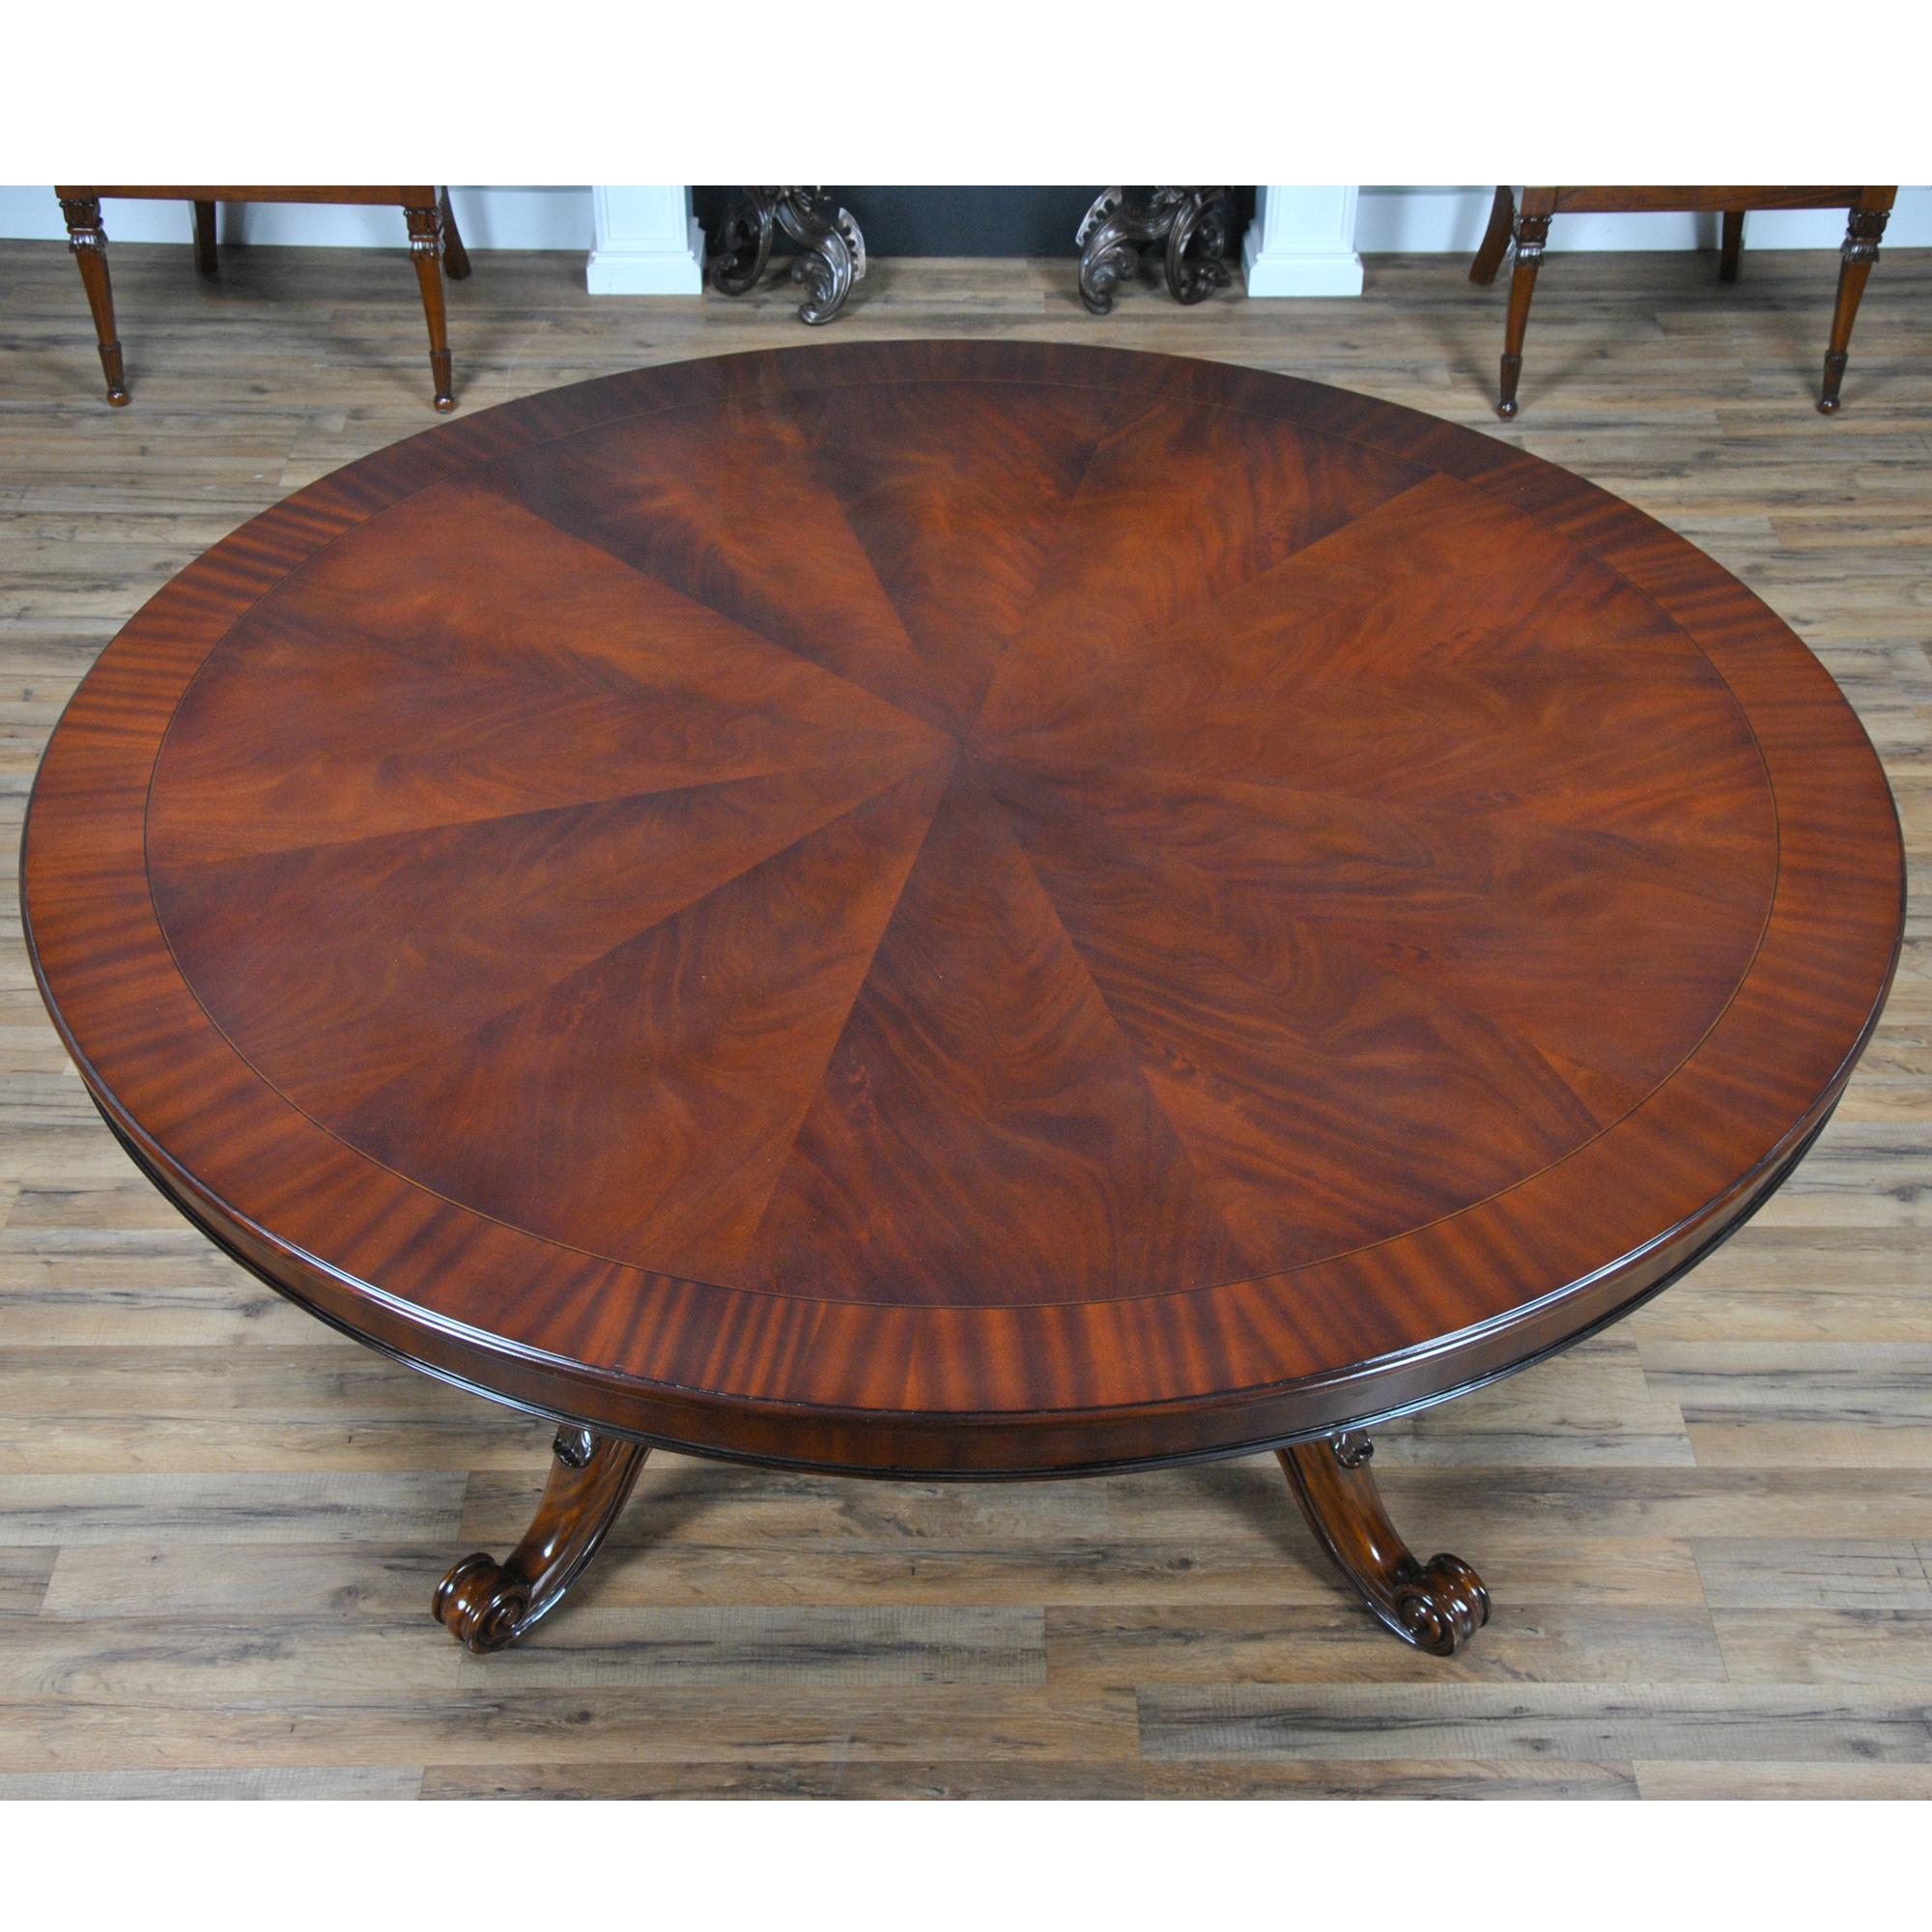 This 72 inch Round Table is as pretty as they come. A fantastic base with scrolled and hand carved feet executed in solid mahogany connects through the platform to carved and turned pillars which are as pretty as the table top. Finished in warm,